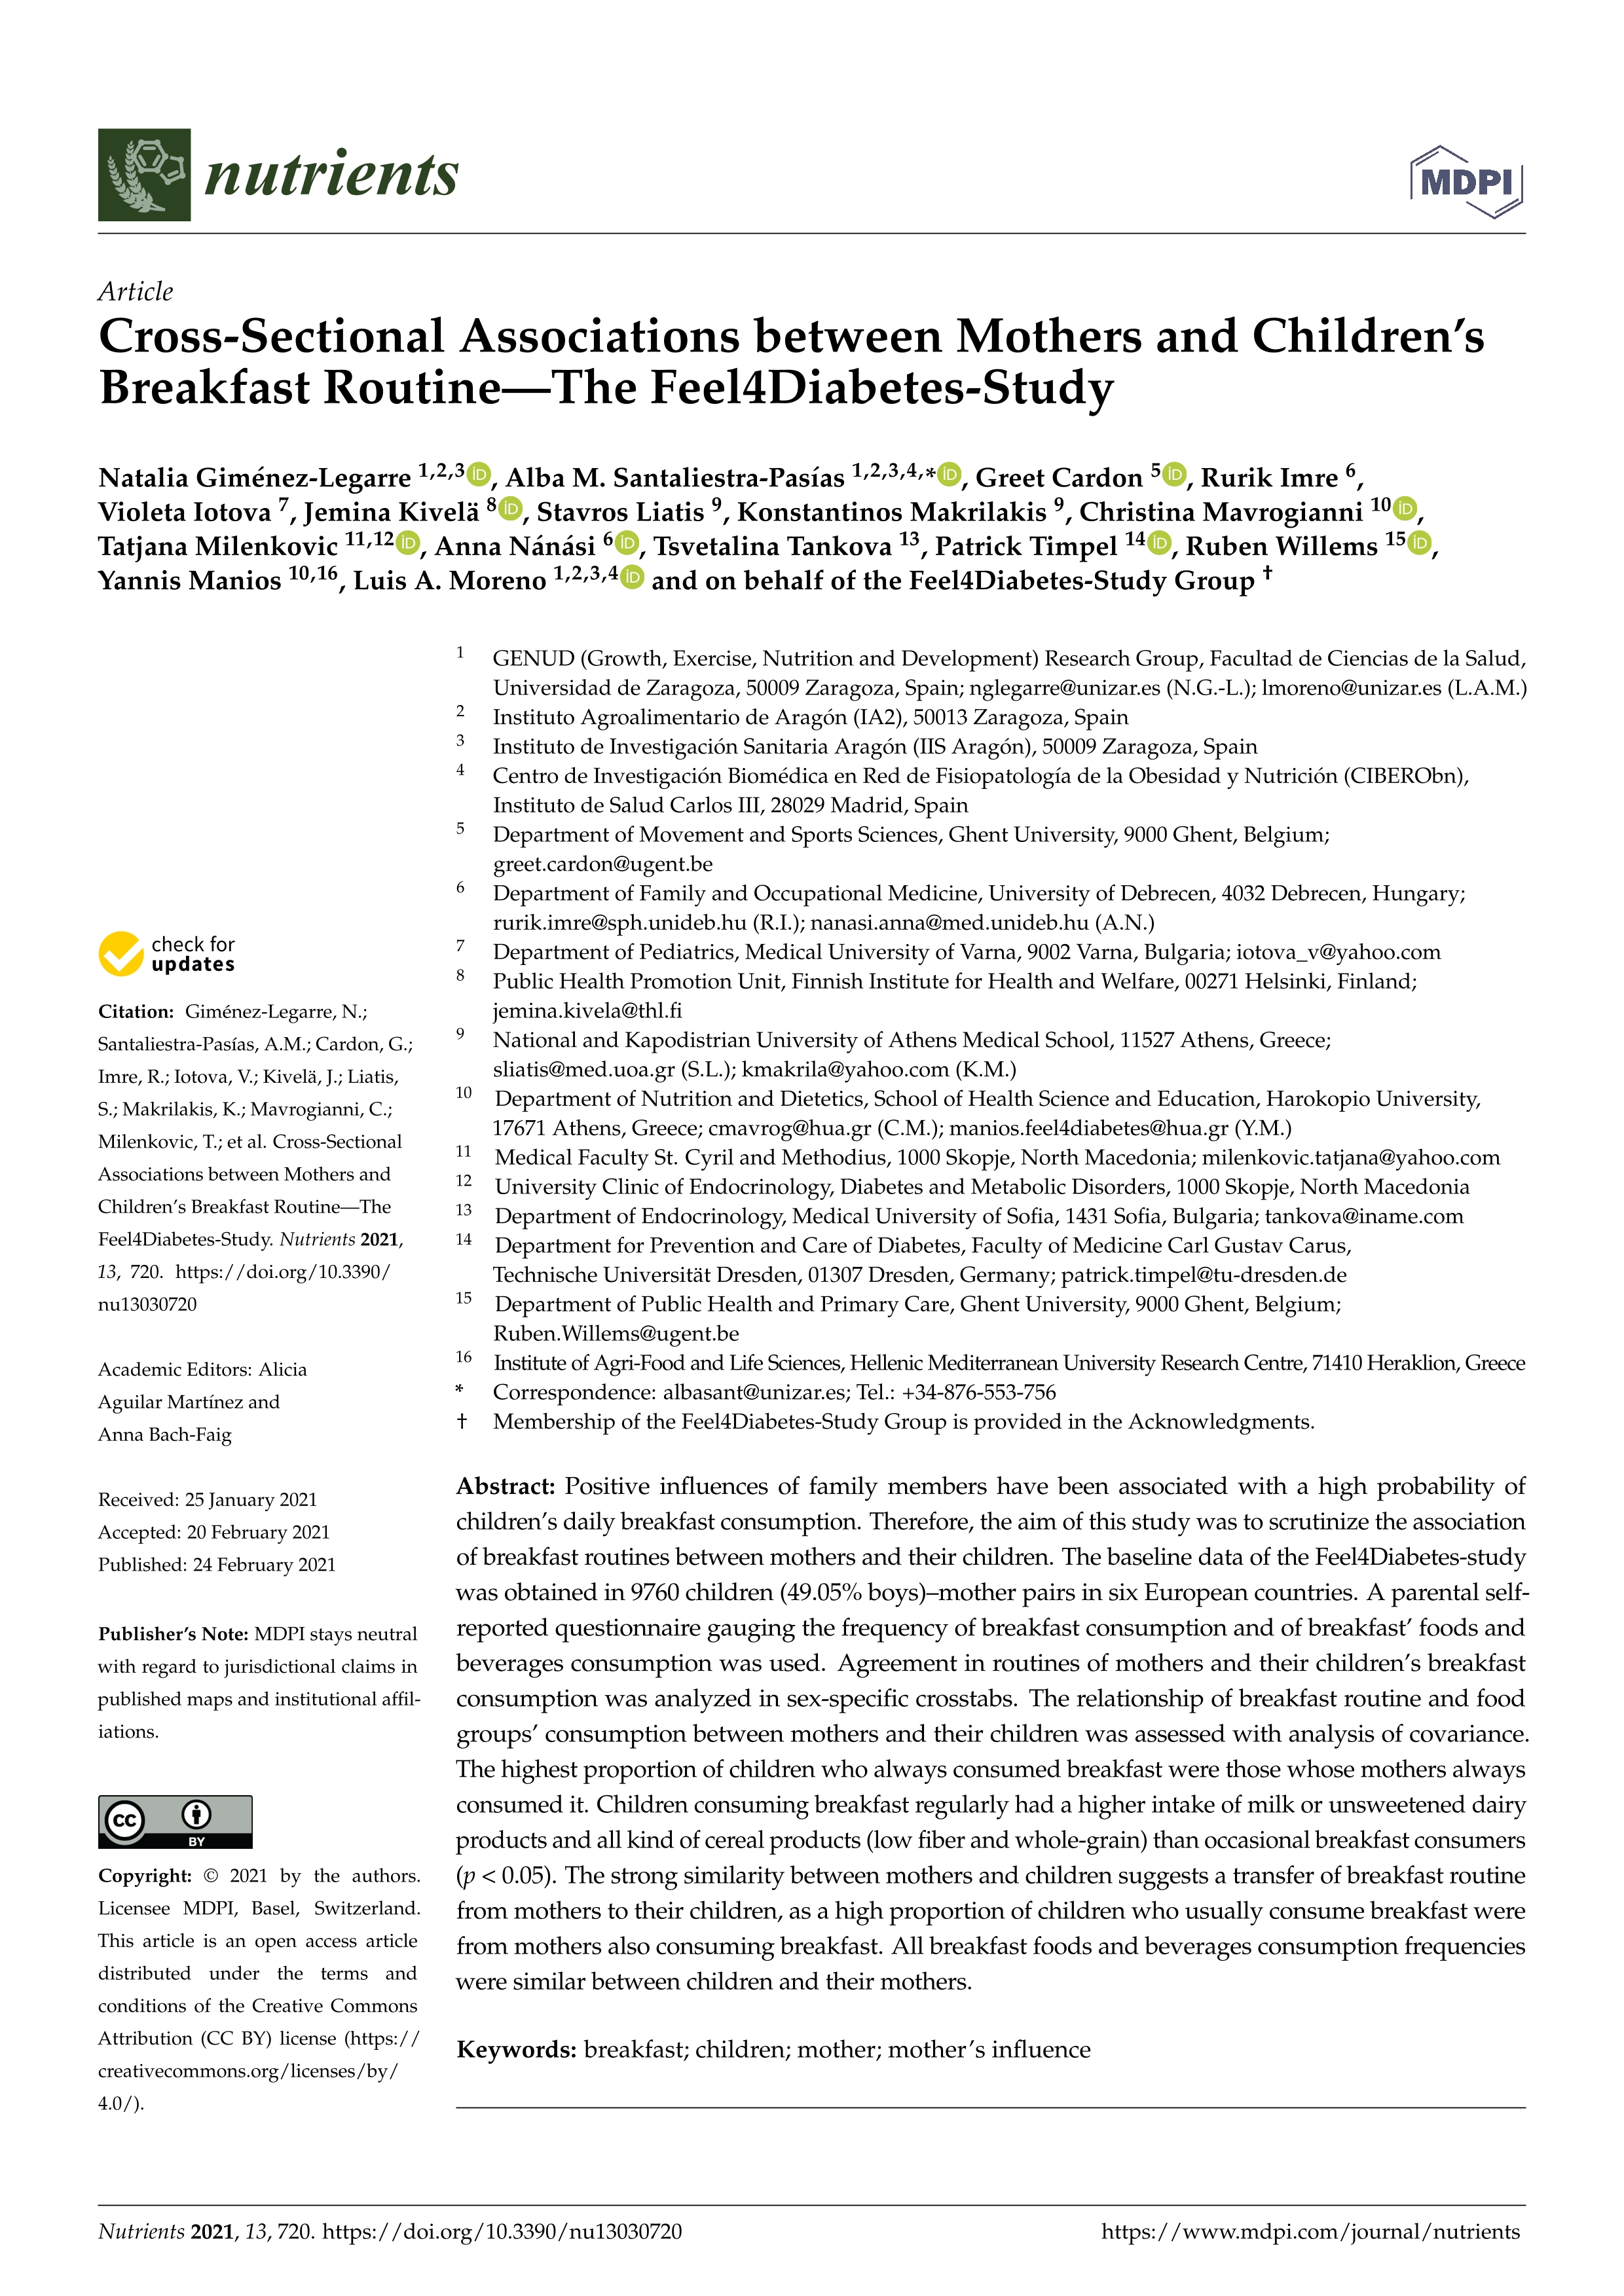 Cross-sectional associations between mothers and children’s breakfast routine - The Feel4Diabetes-study